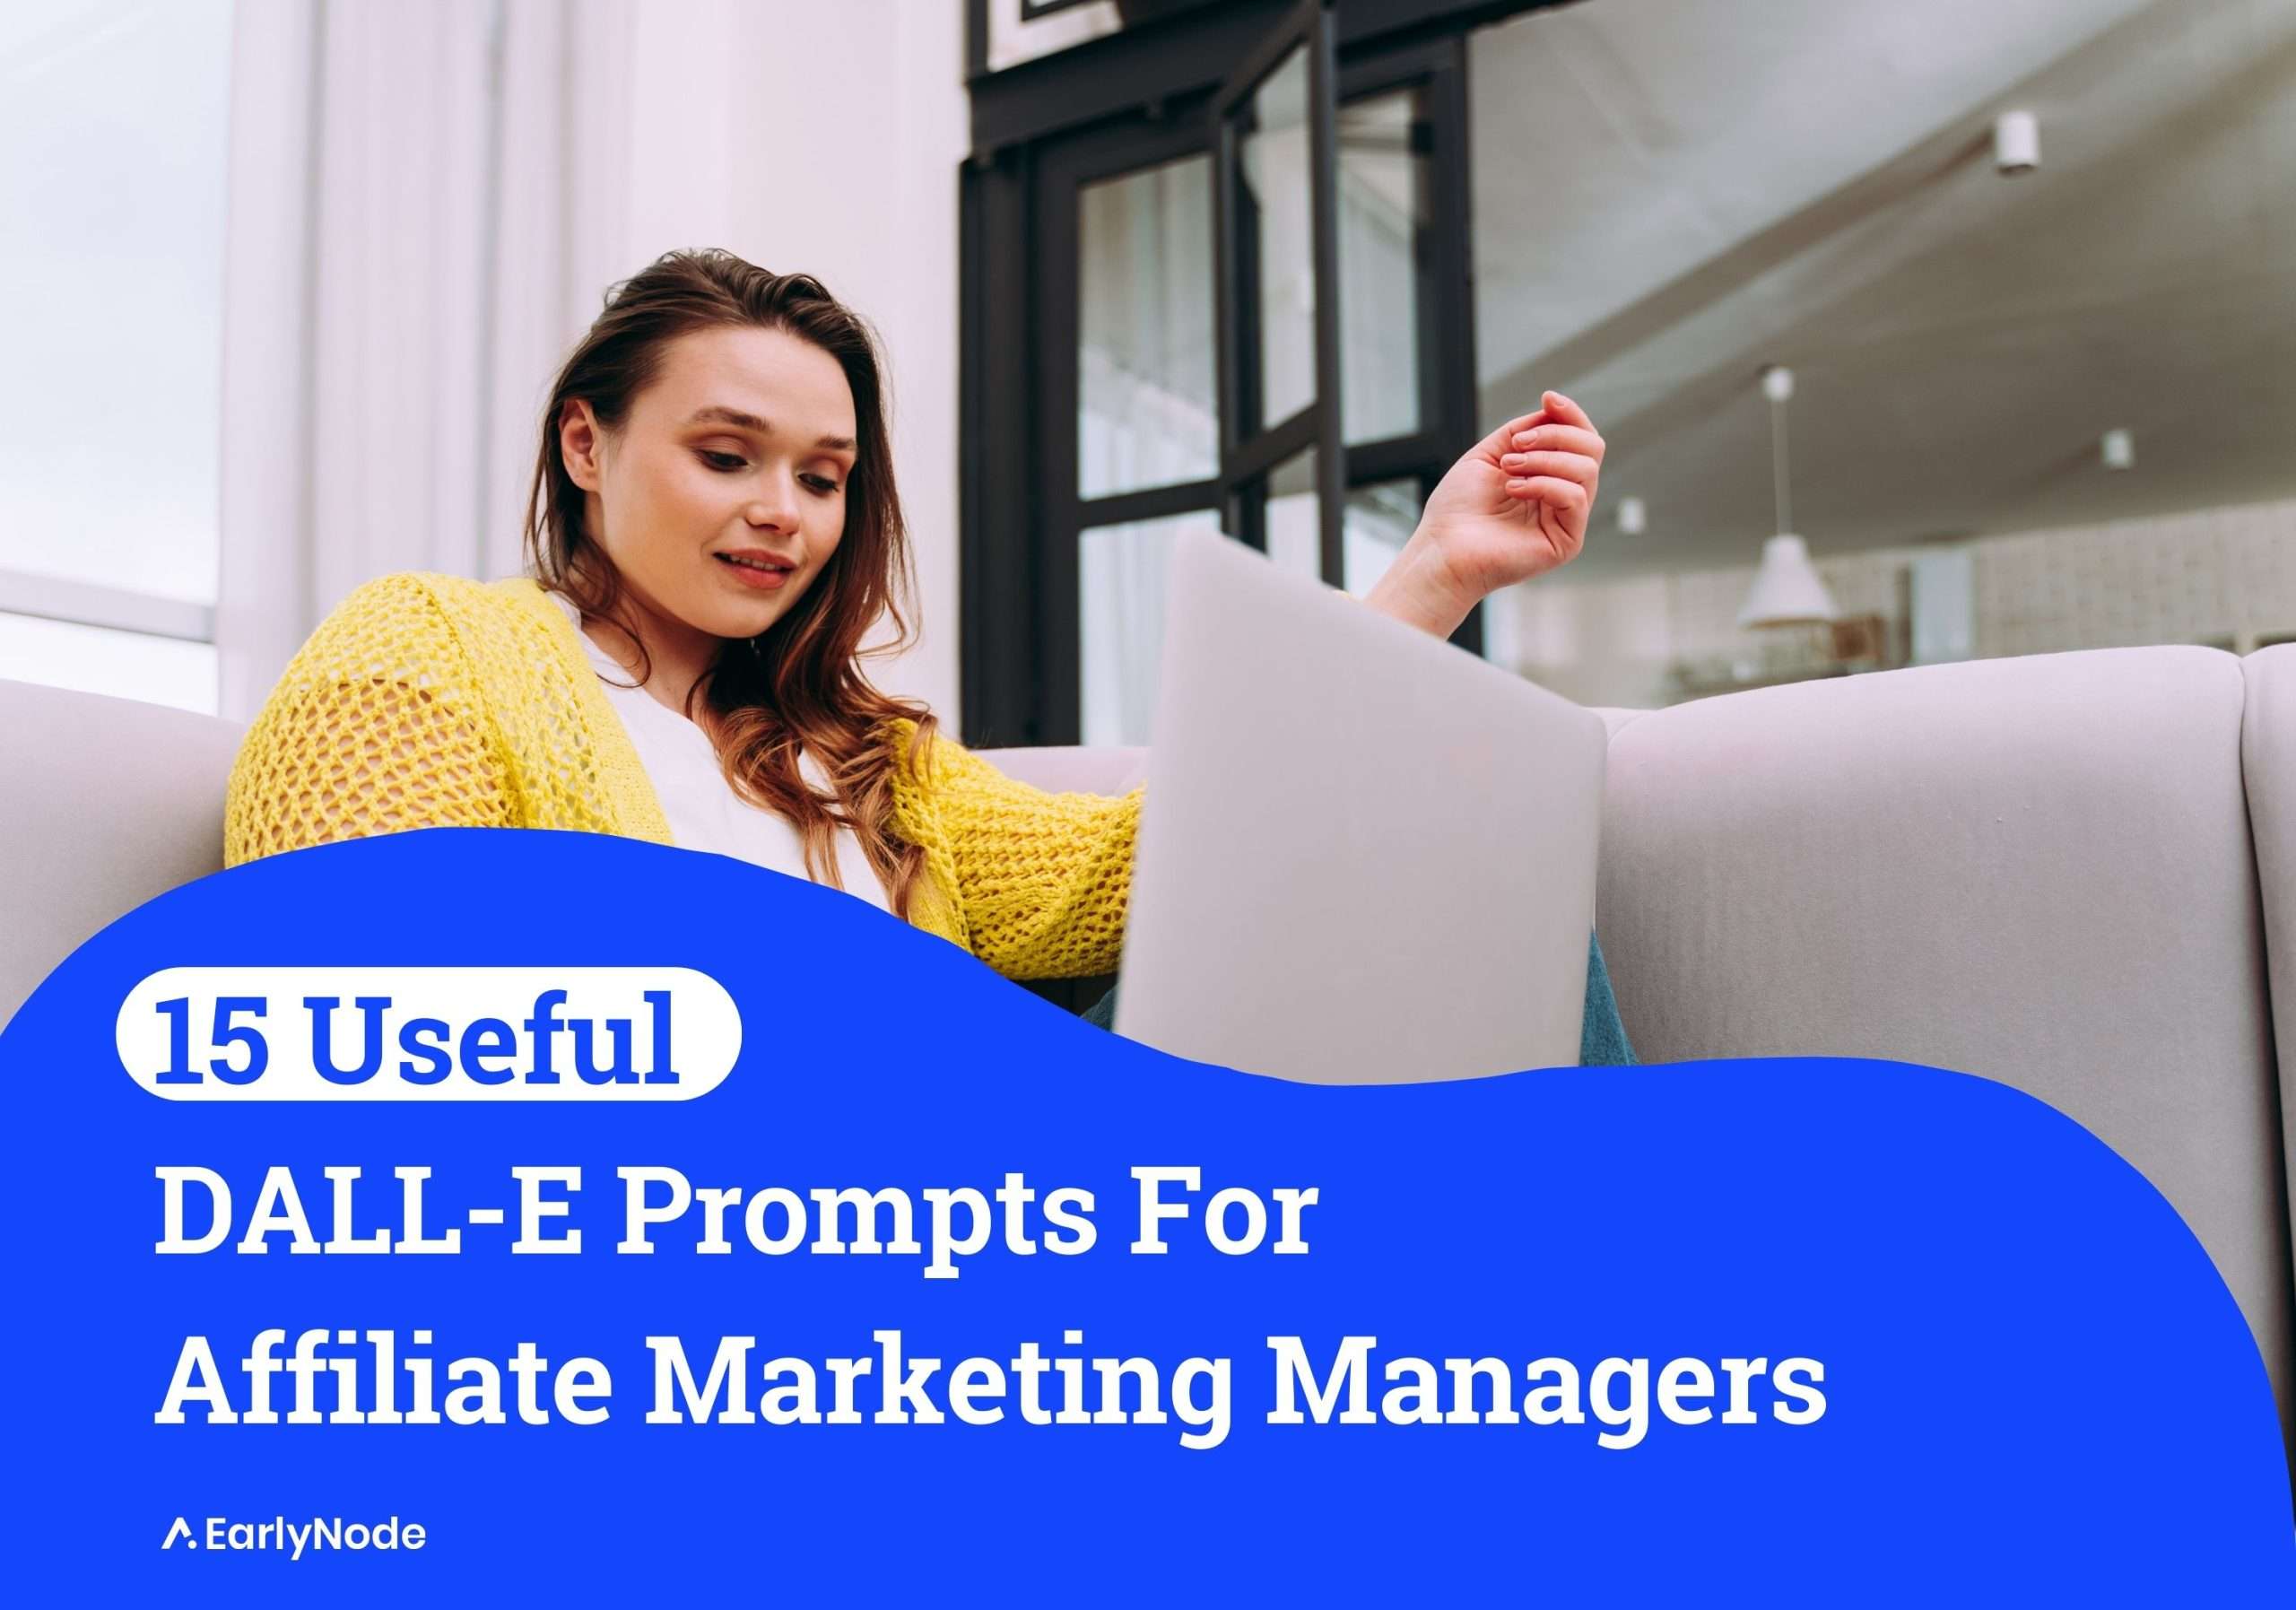 15+ Helpful DALL-E Prompts for Affiliate Marketing Managers